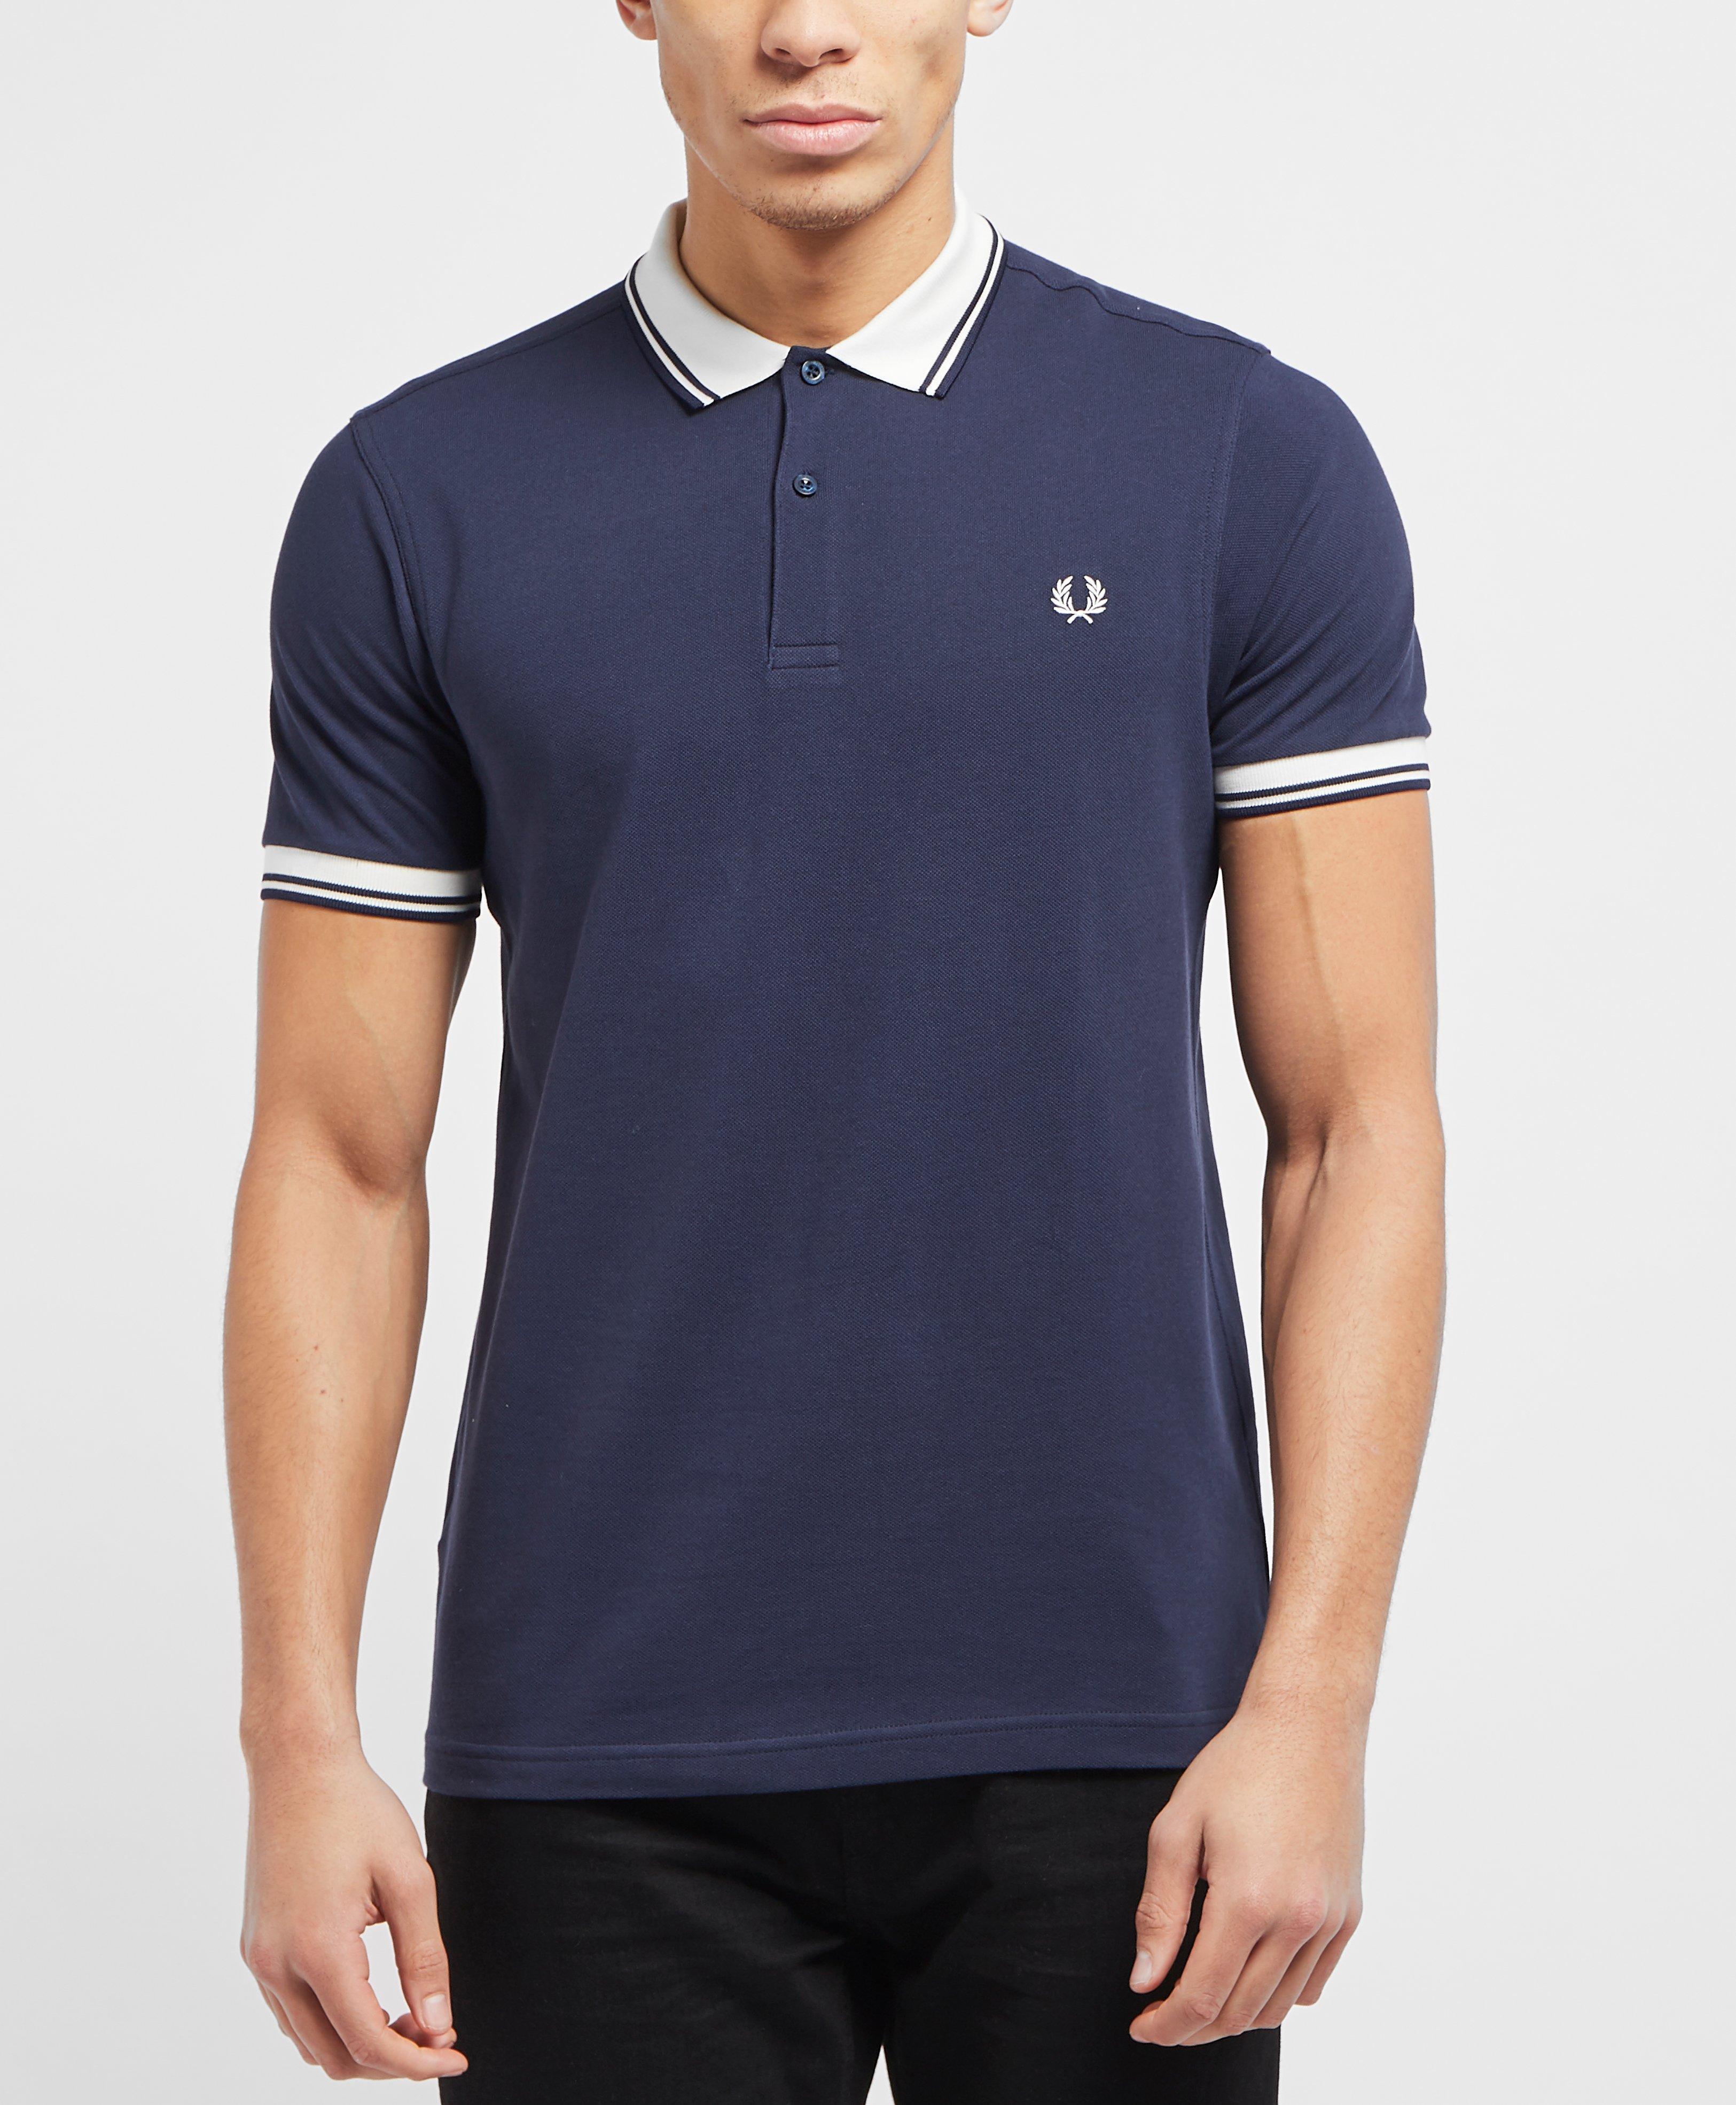 Lyst - Fred Perry Contrast Collar Short Sleeve Polo Shirt in Blue for Men